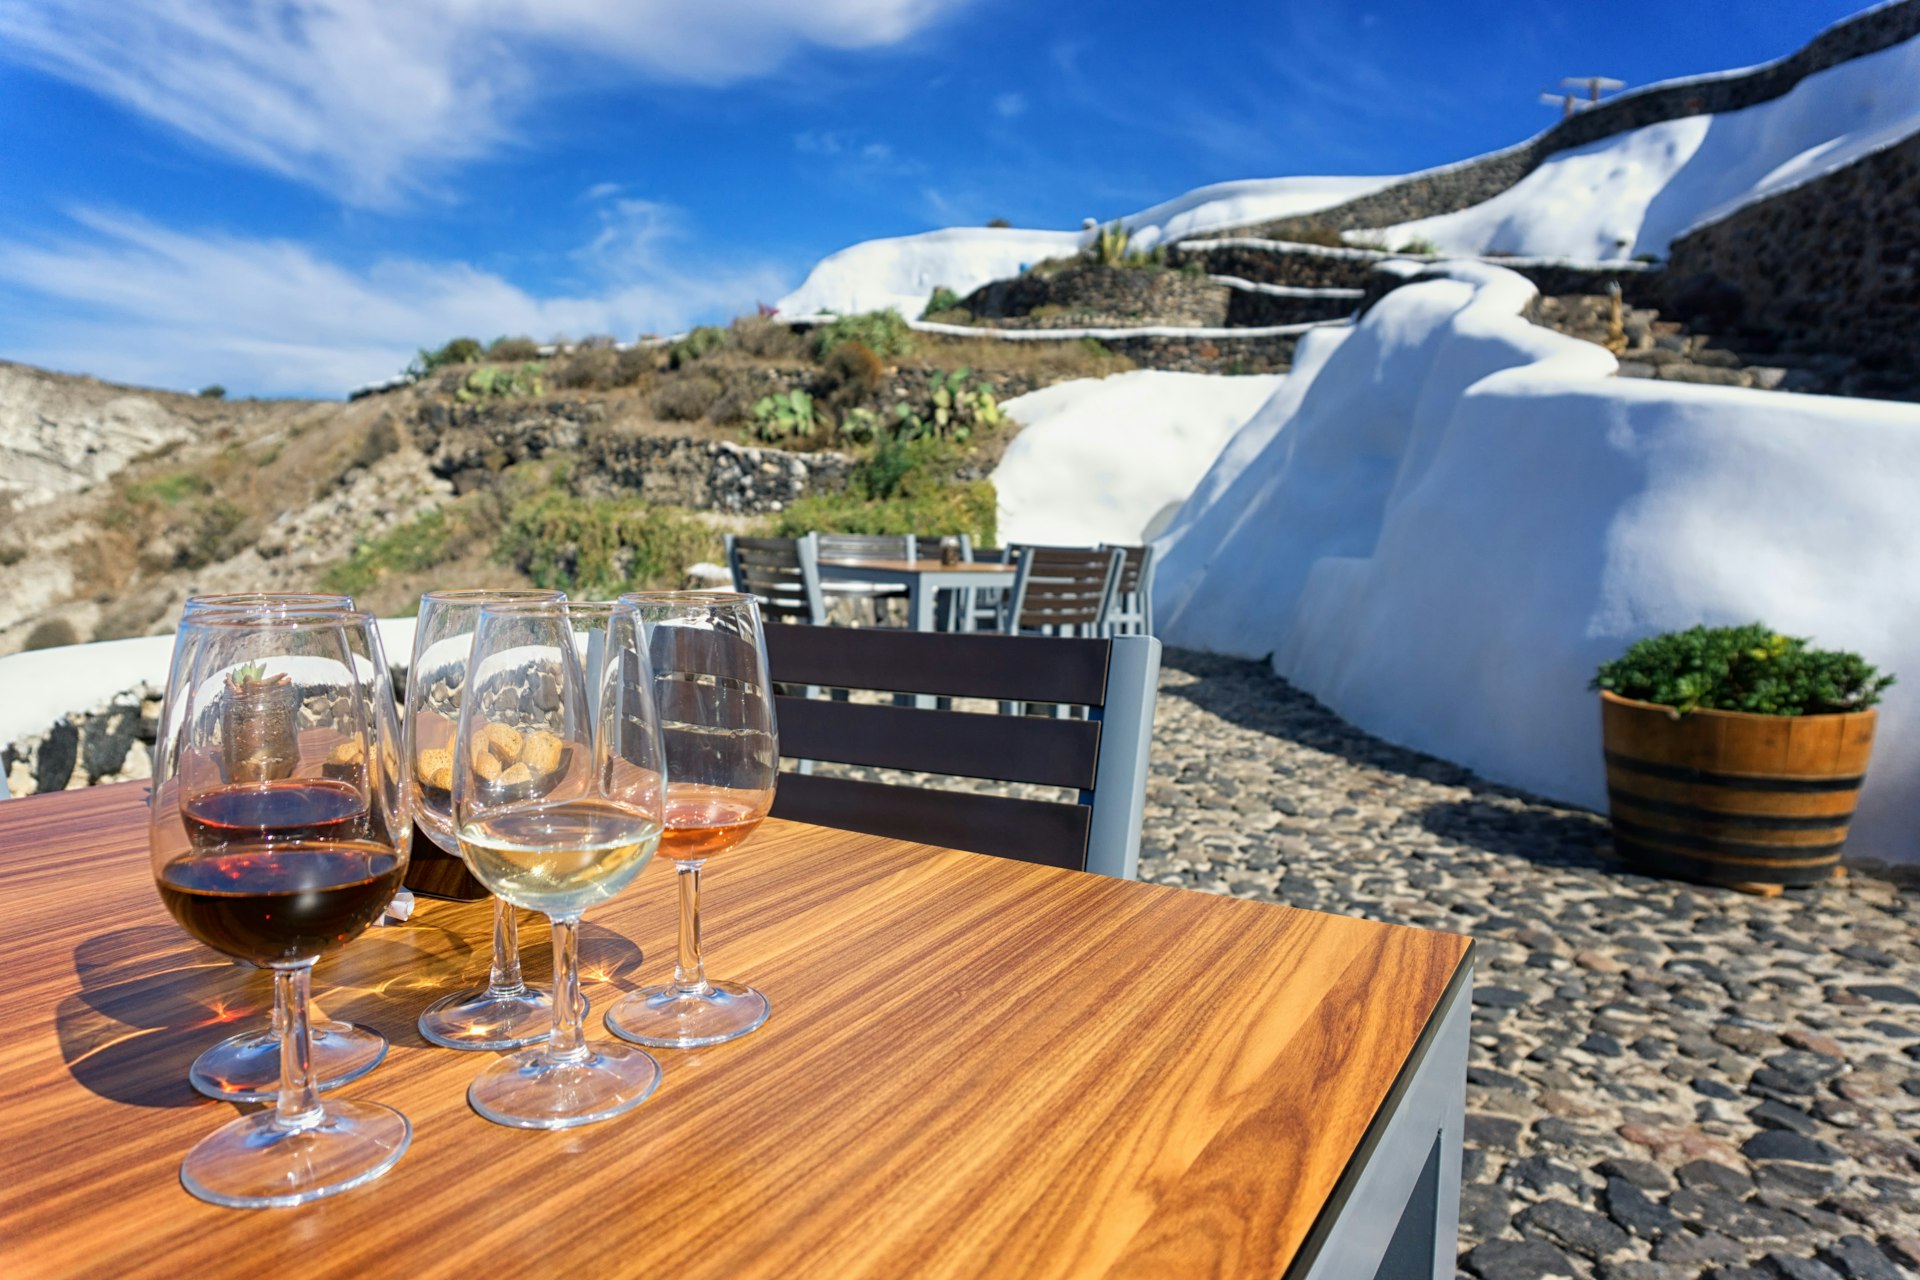 Several glasses of wine stand on a table outside a small white stone building